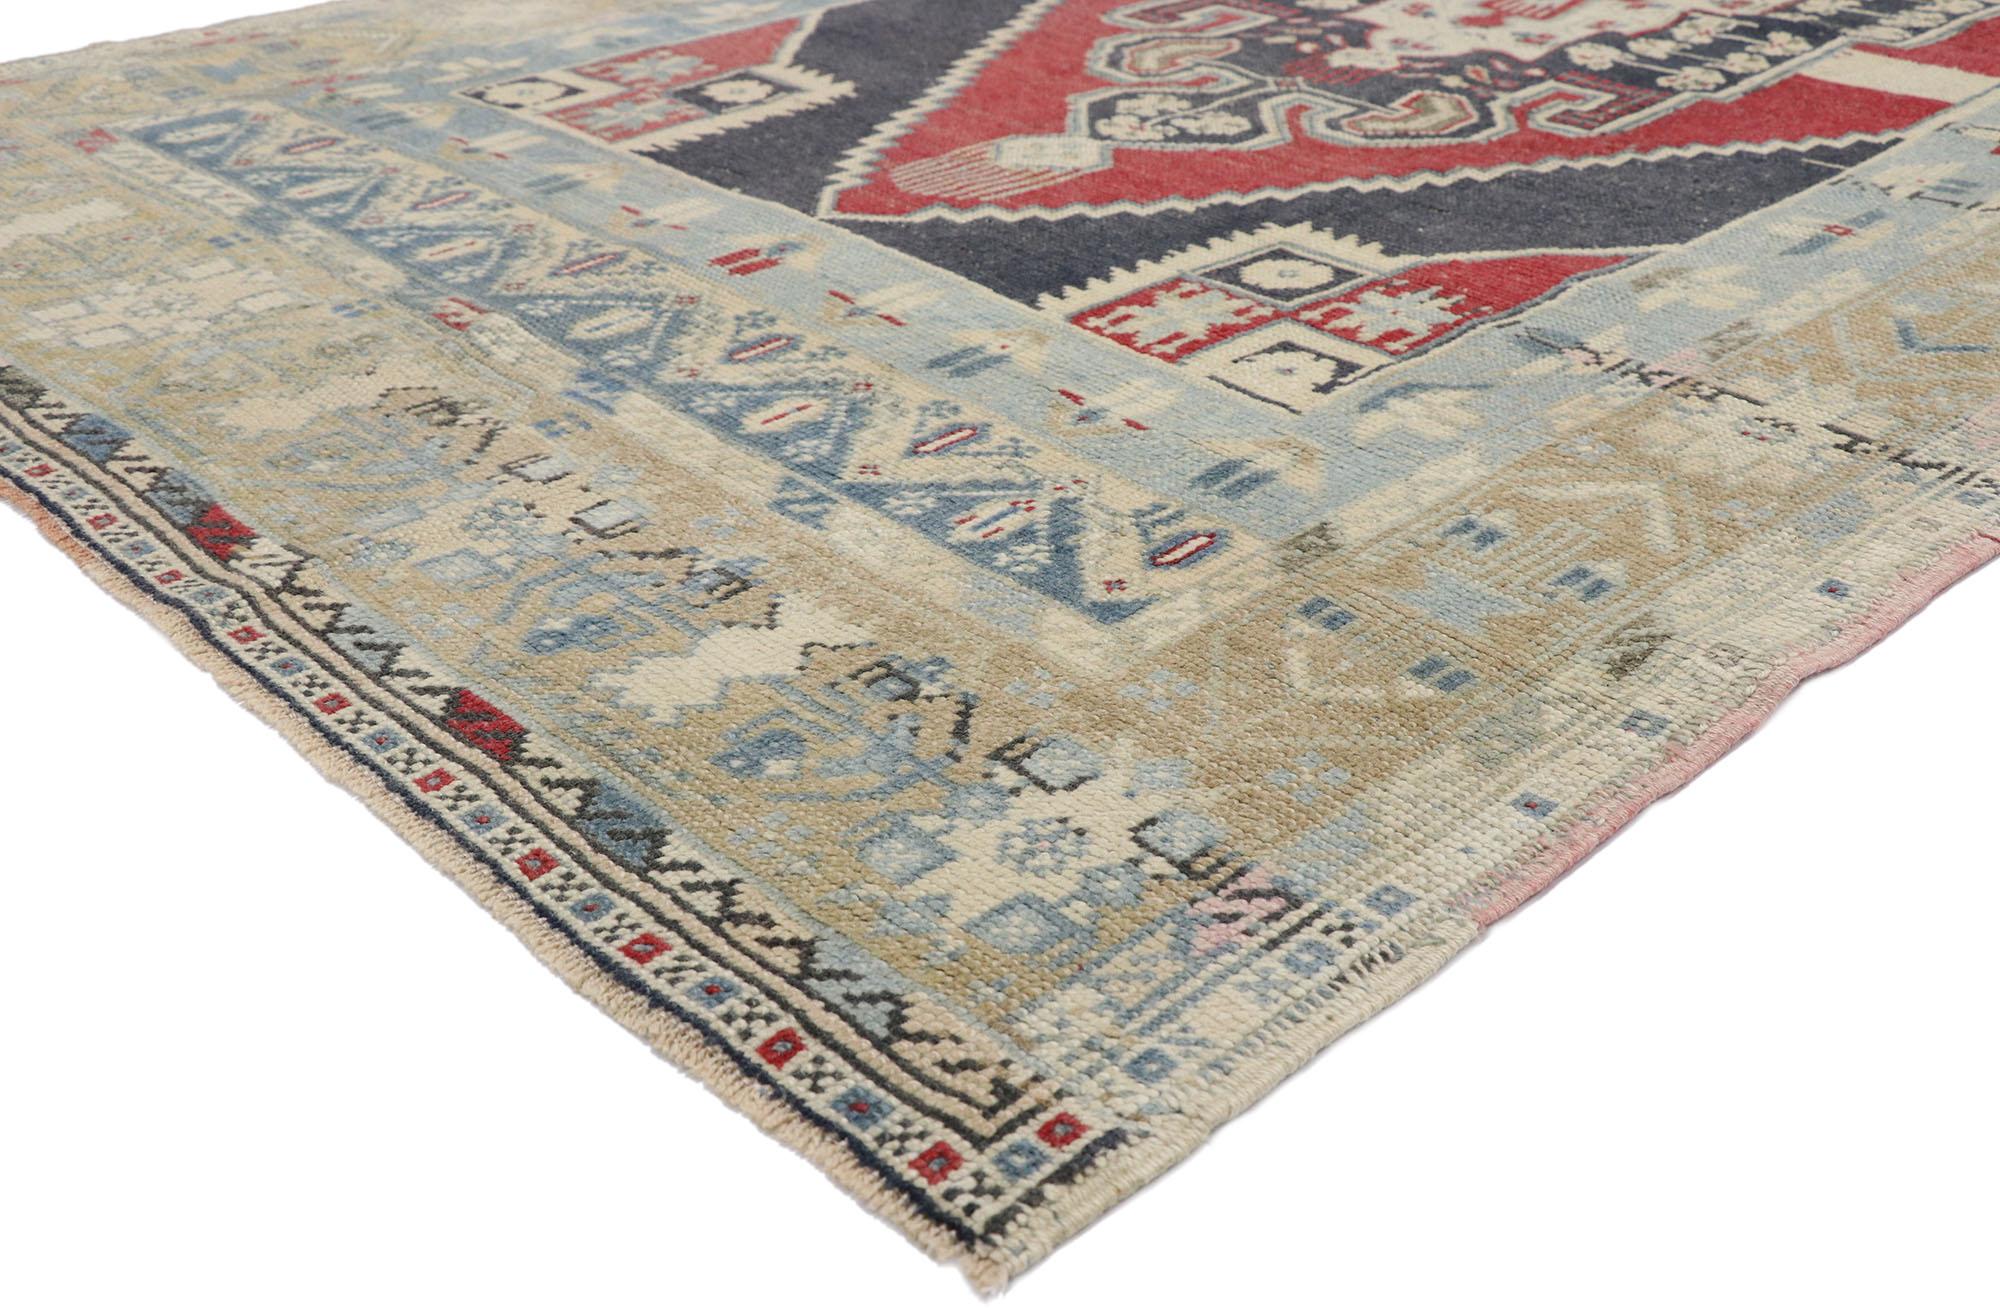 52674, vintage Turkish Oushak rug with relaxed Federal style. With timeless appeal, refined colors, and architectural design elements, this hand knotted wool vintage Turkish Oushak rug can beautifully blend contemporary and traditional interiors. It